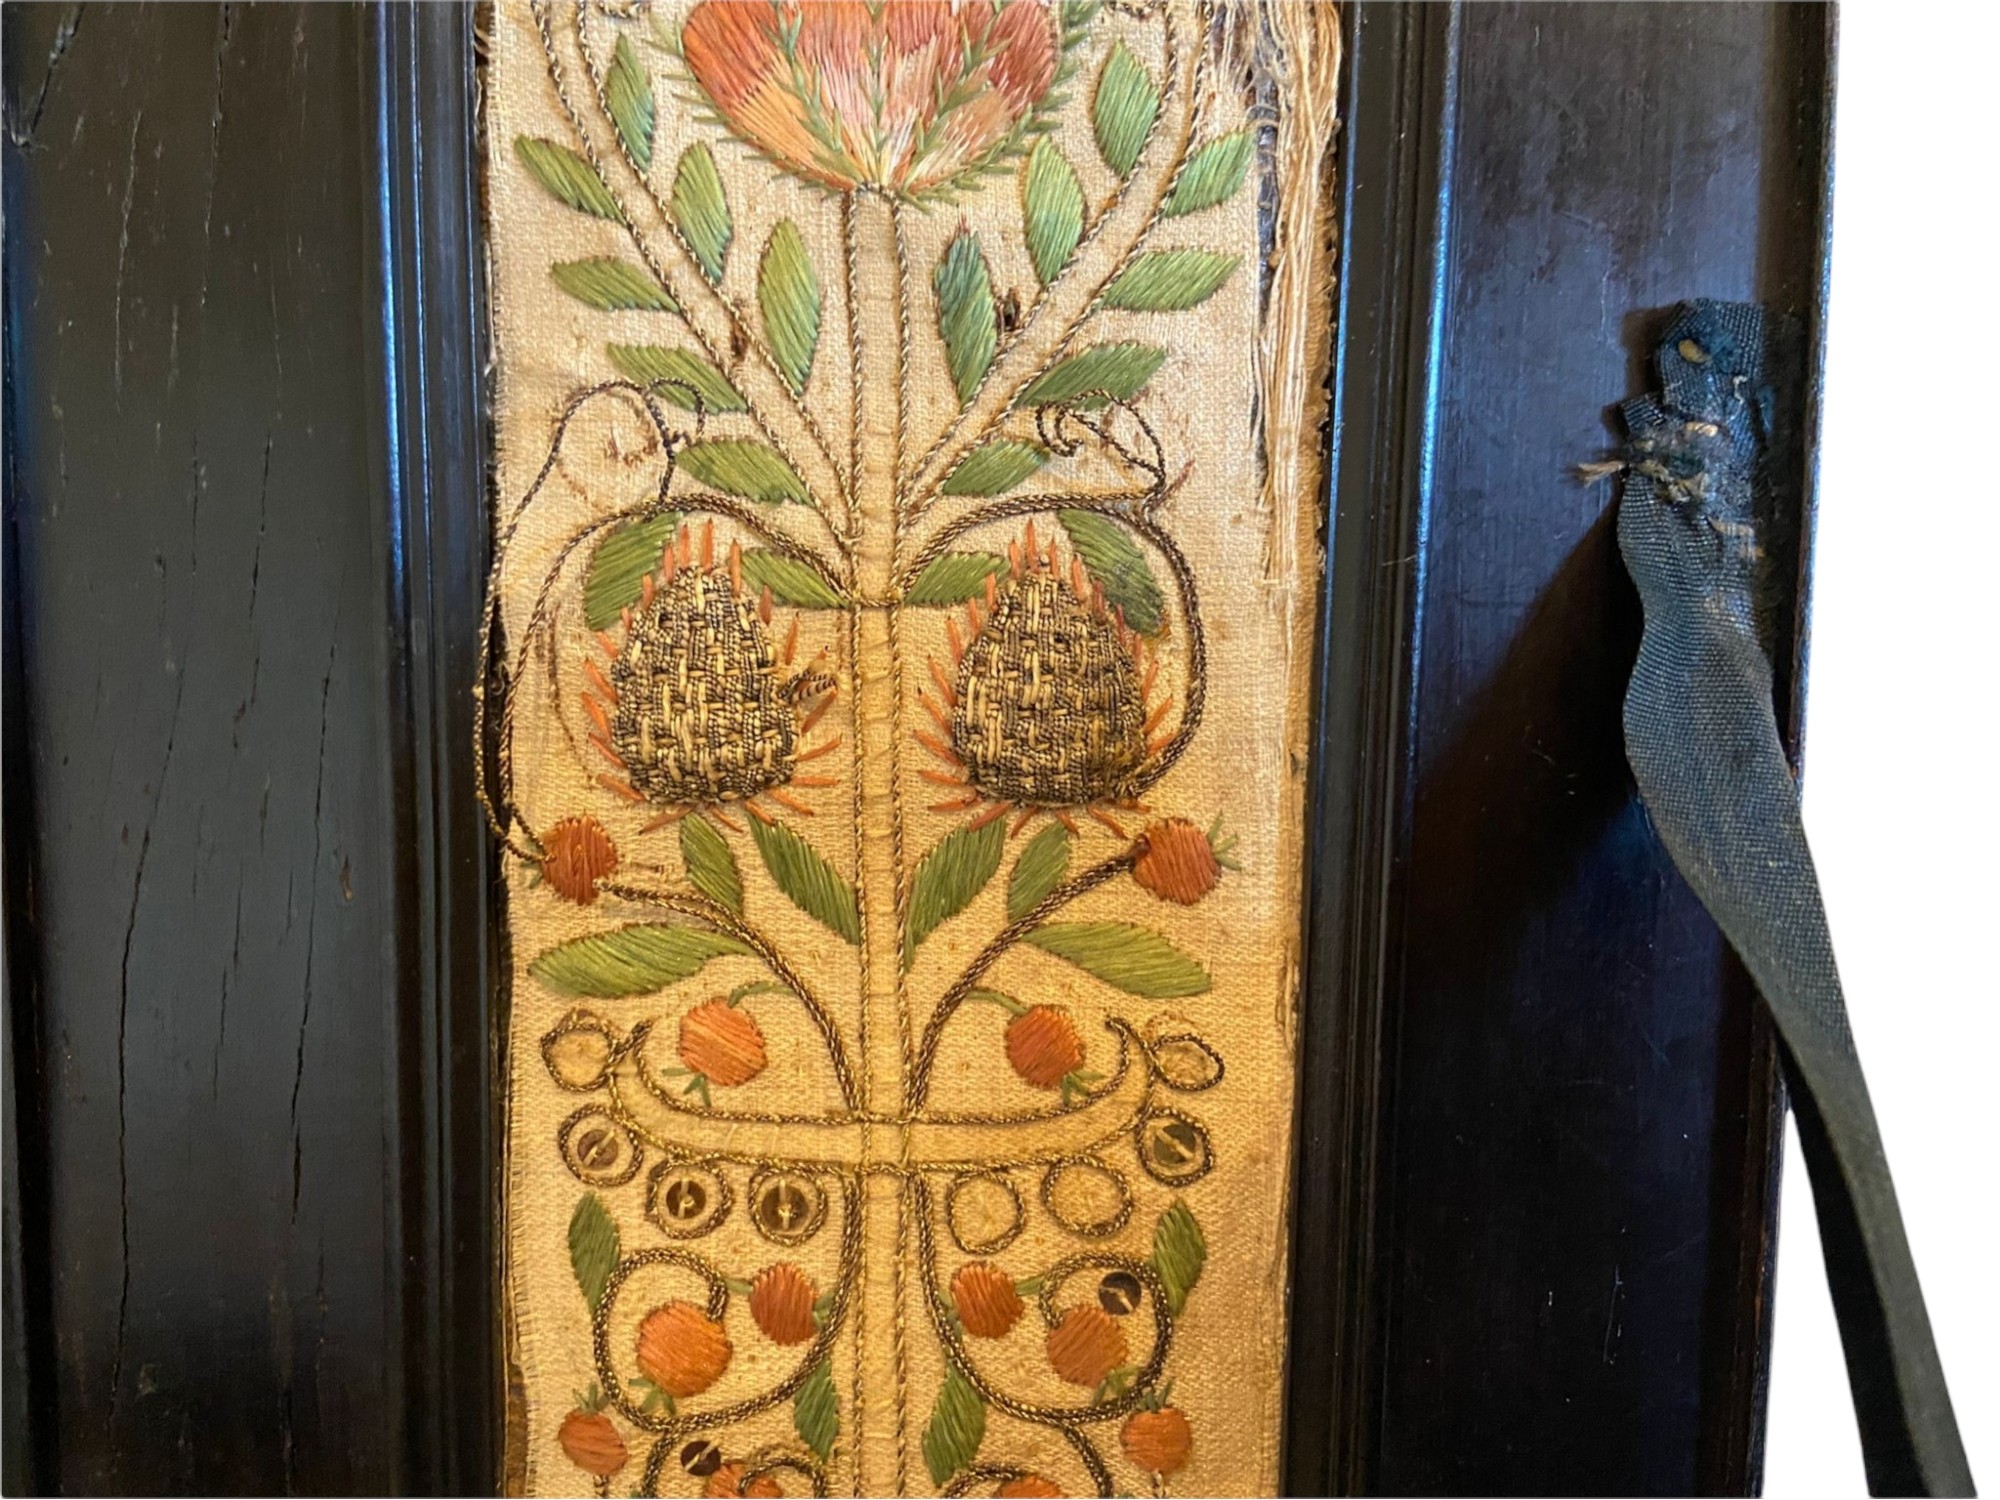 A RARE 17TH CENTURY EBONY IVORY AND EMBROIDERED RAISED WORK ANTWERP CABINET ON STAND The rise and - Image 9 of 12